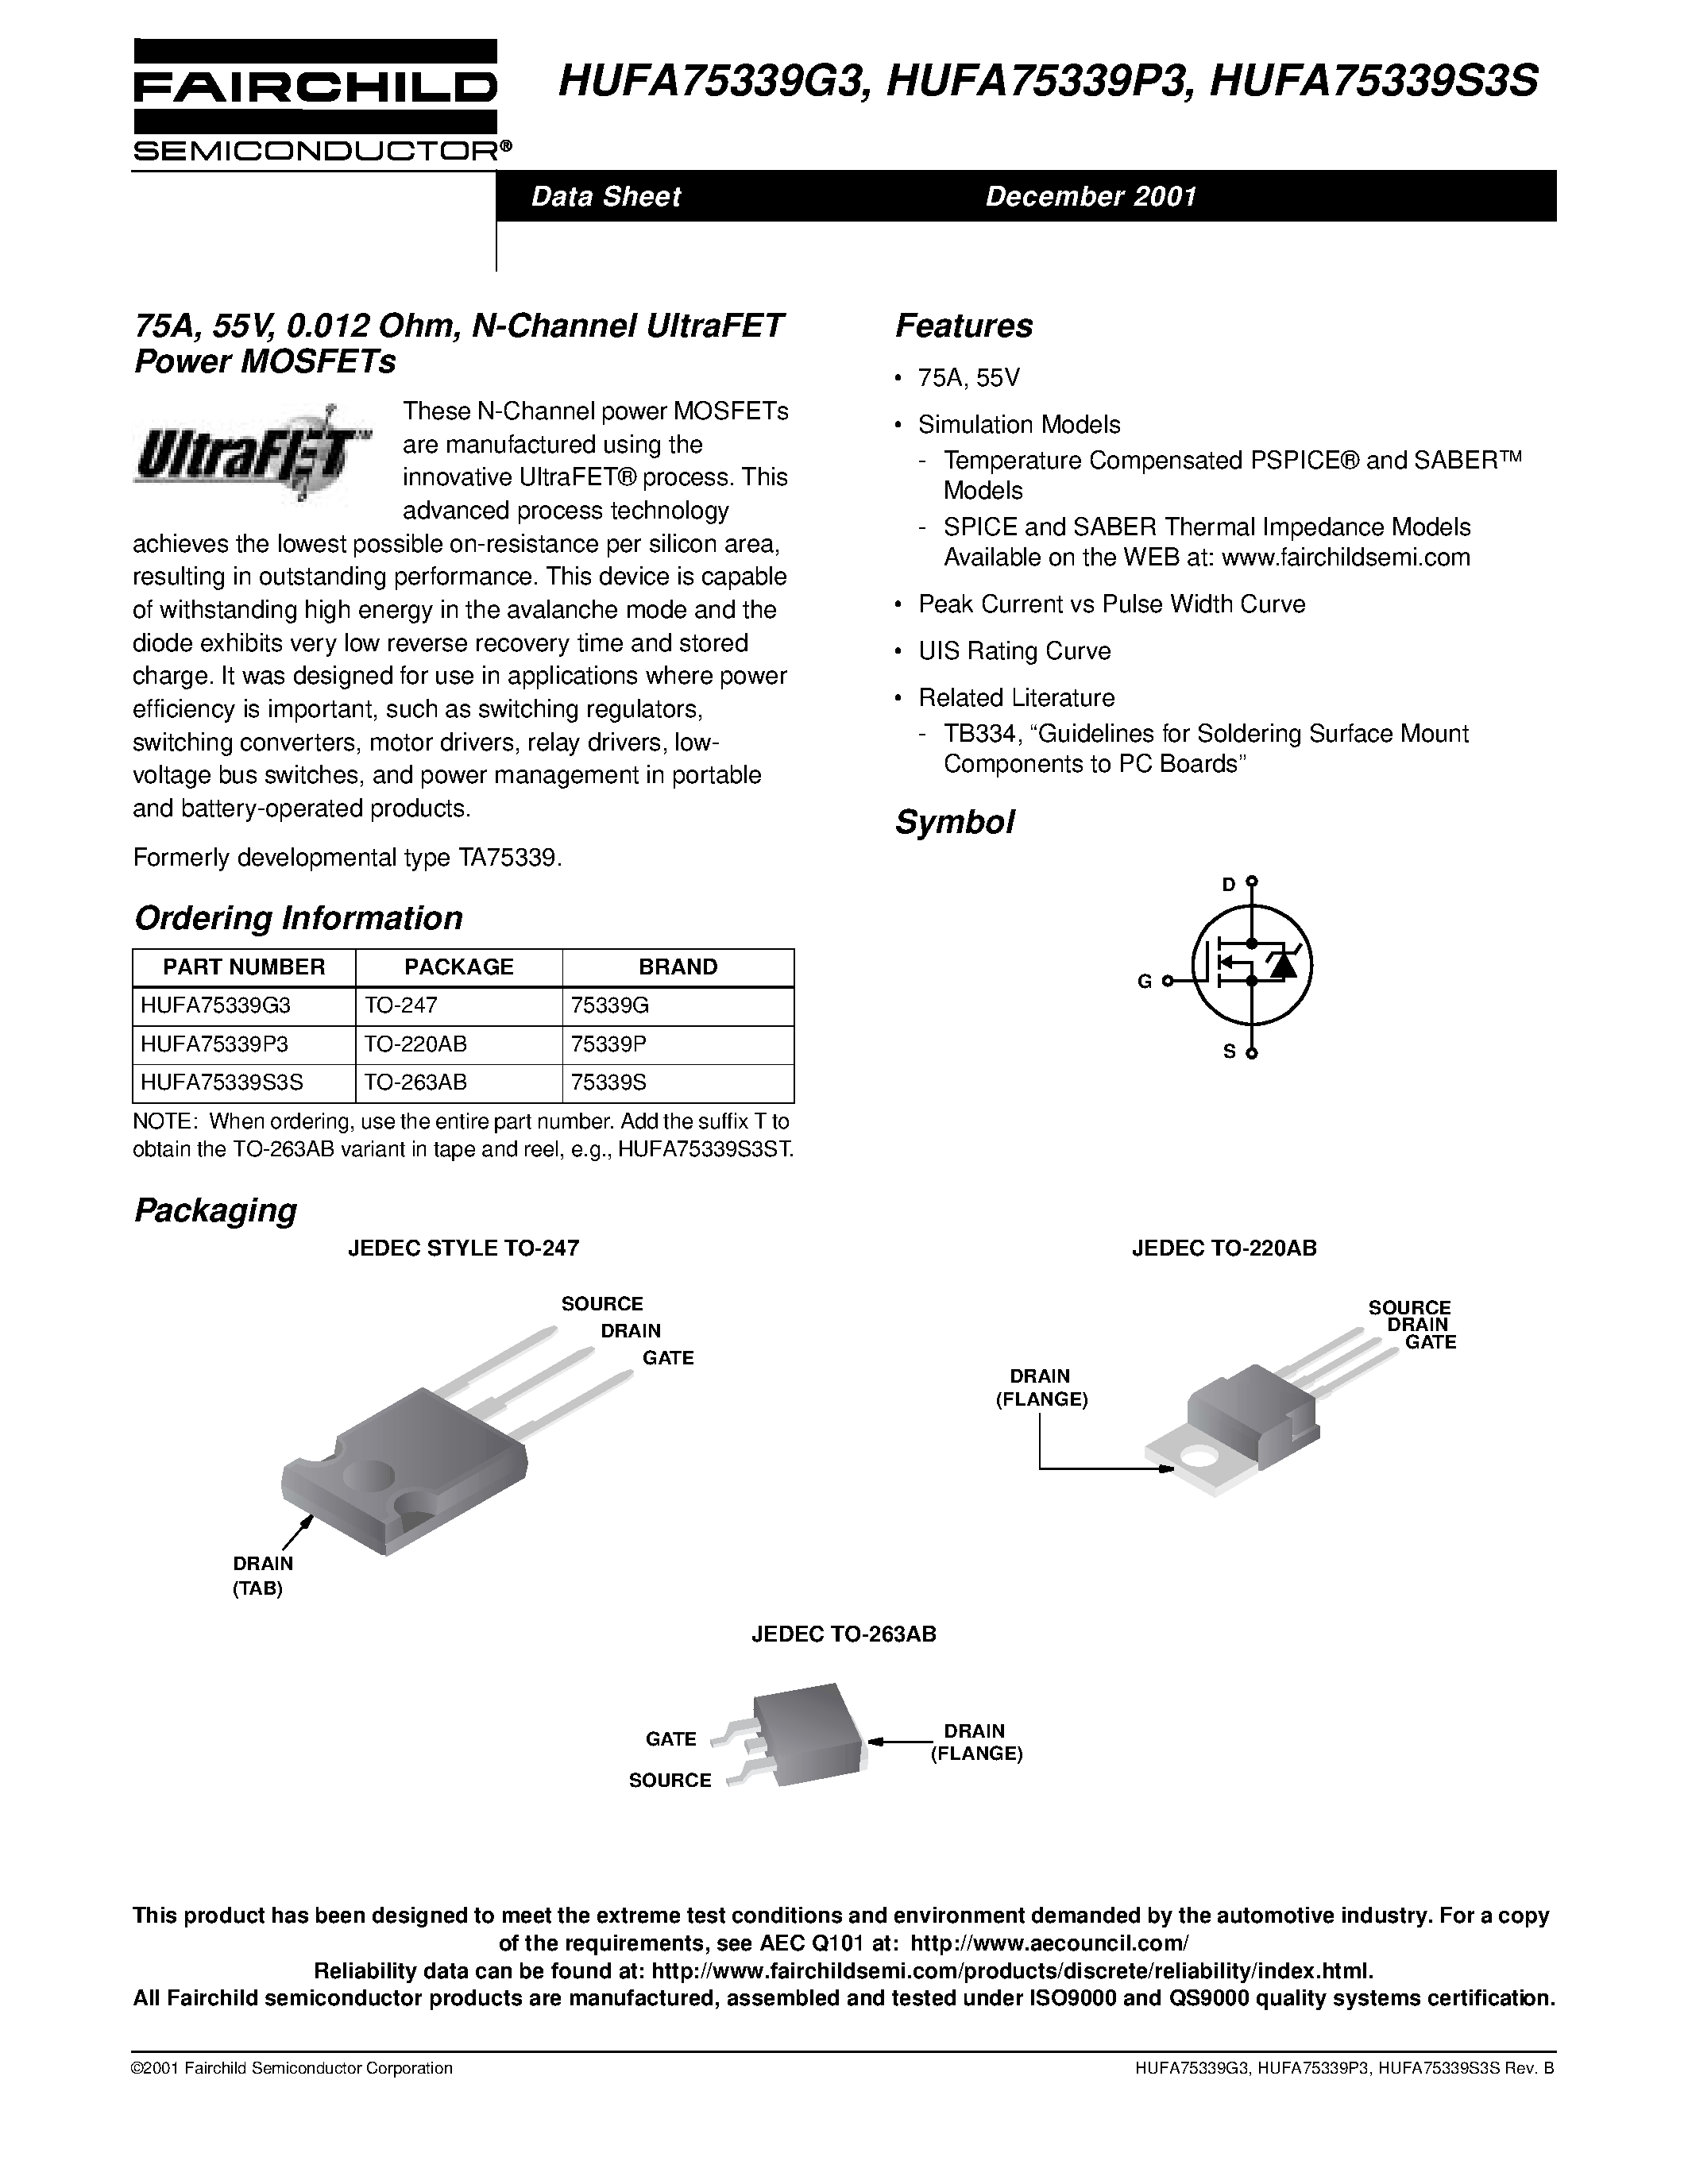 Datasheet HUFA75332S3S - 60A/ 55V/ 0.019 Ohm/ N-Channel UltraFET Power MOSFETs page 1